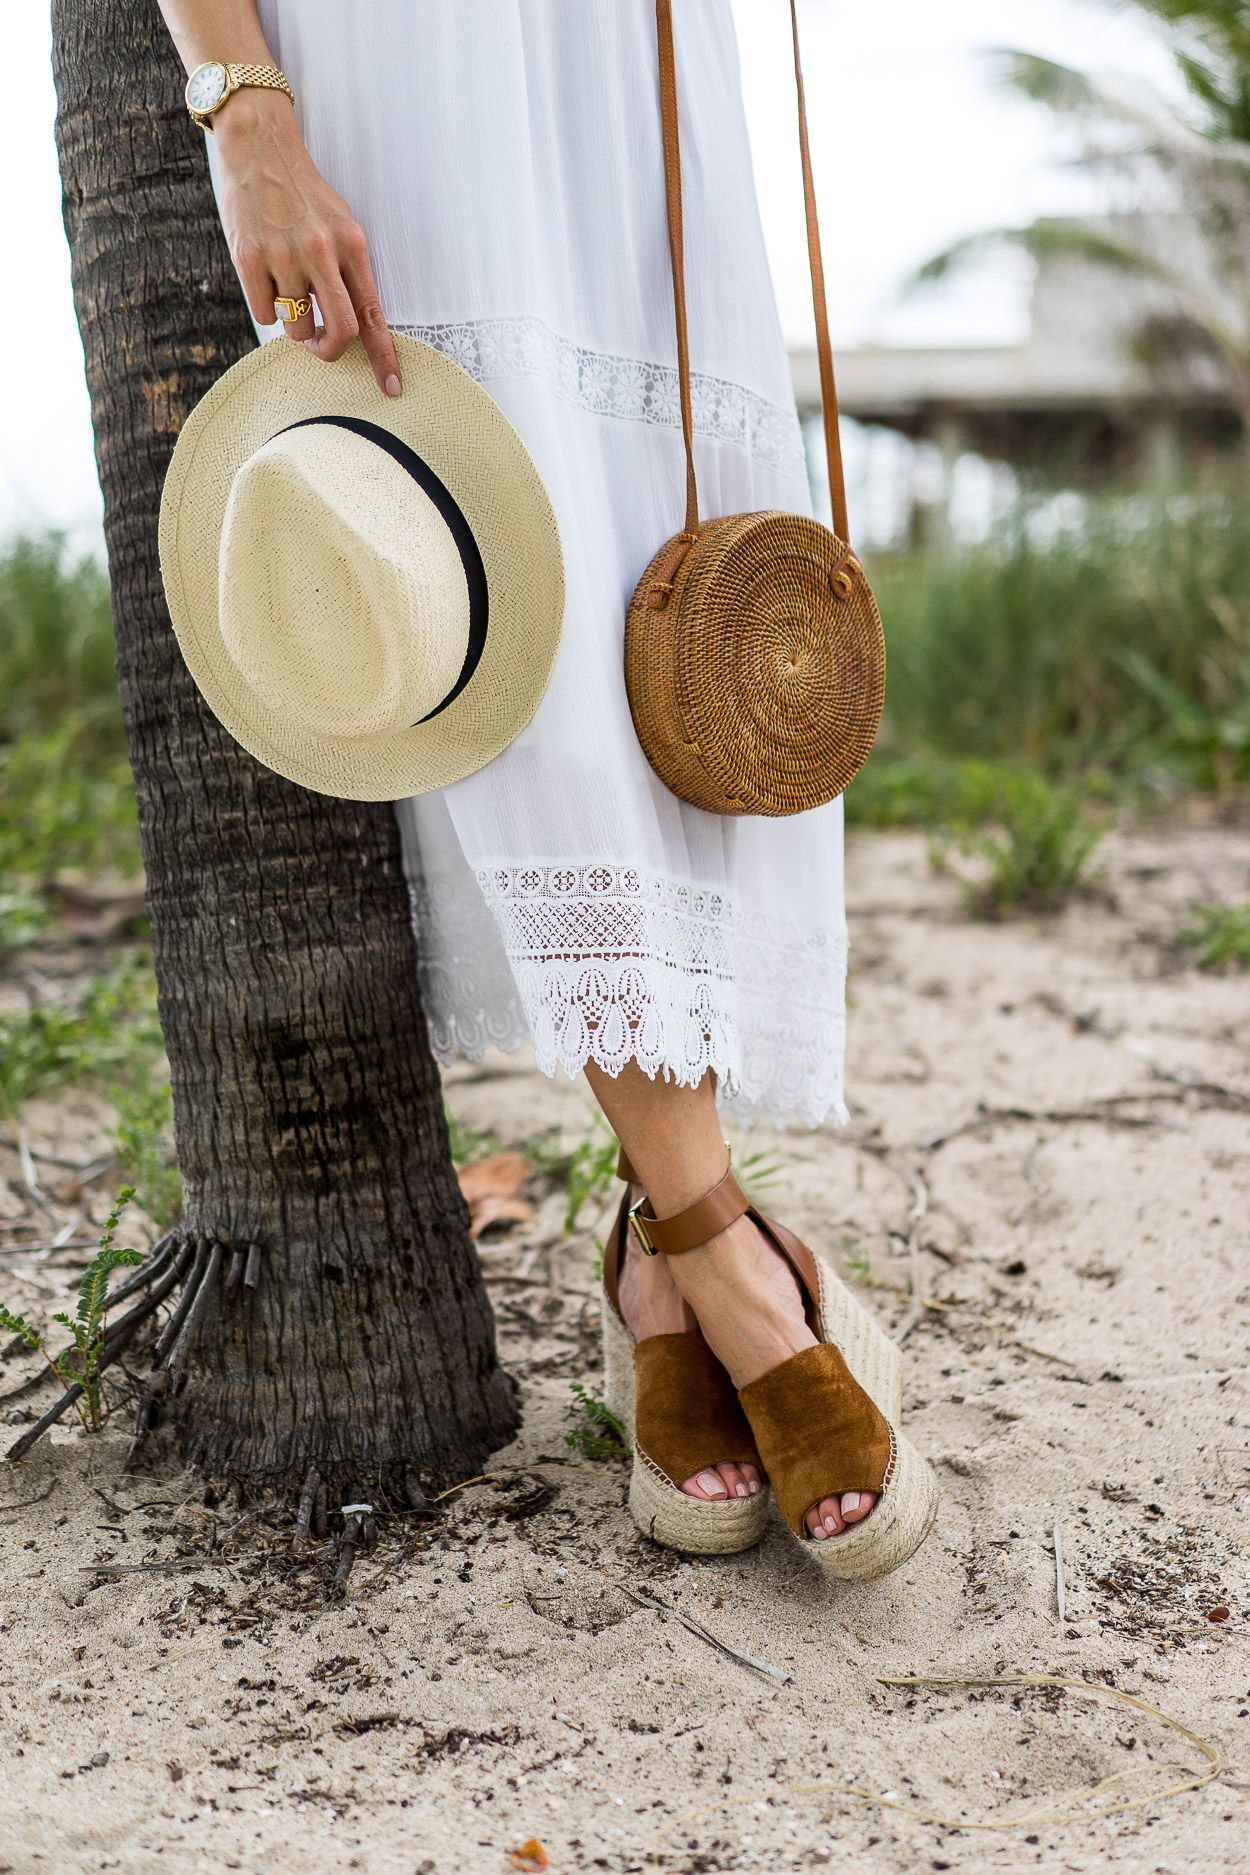 Easy summer style includes key pieces from Old Navy like this white crochet maxi dress and round basket bag with suede Marc Fisher espadrilles as worn by Amanda of A Glam Lifestyle blog